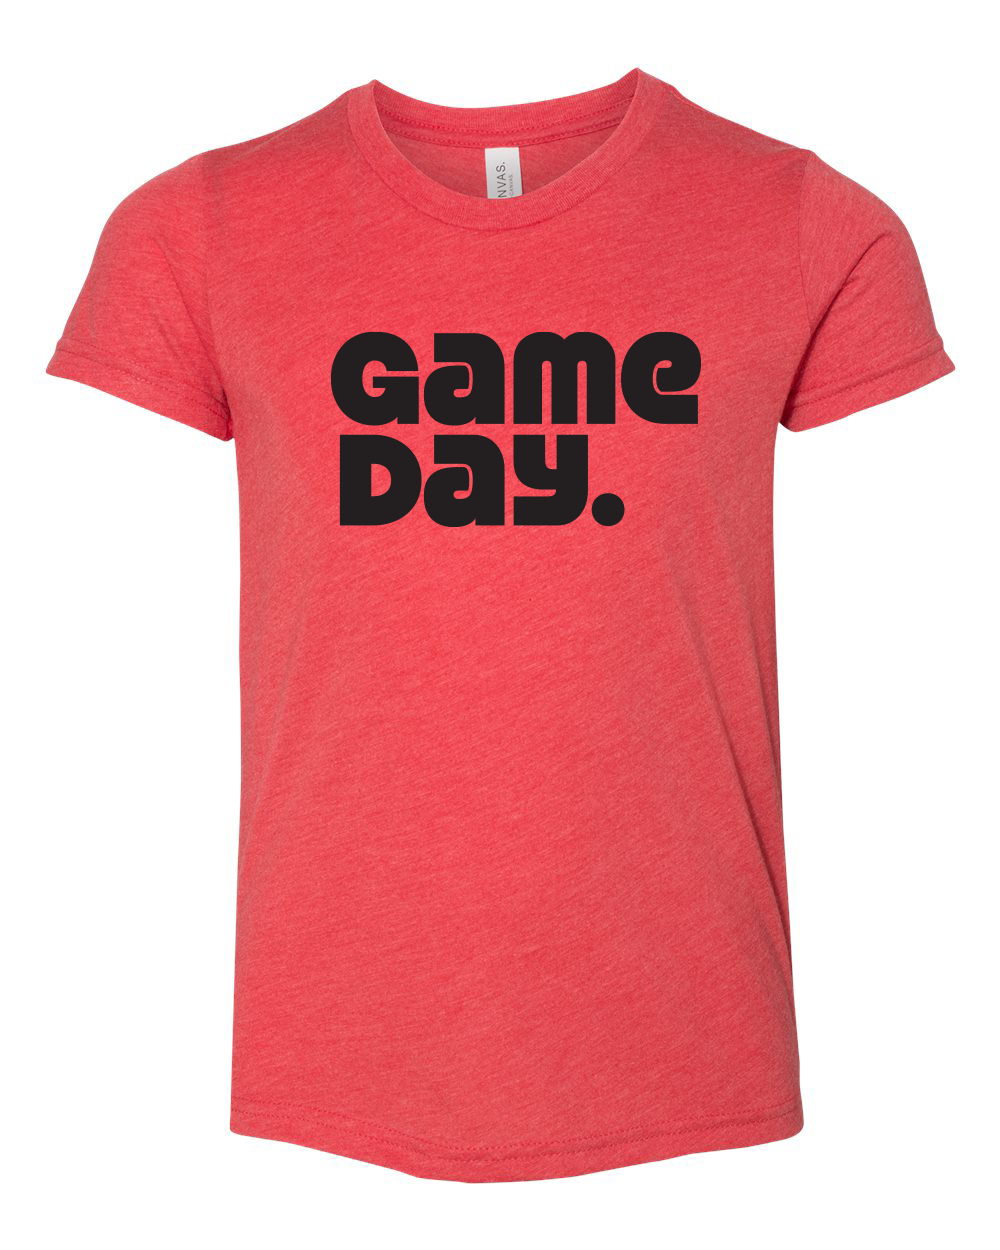 Graphic Tee - Game Day Red/Black